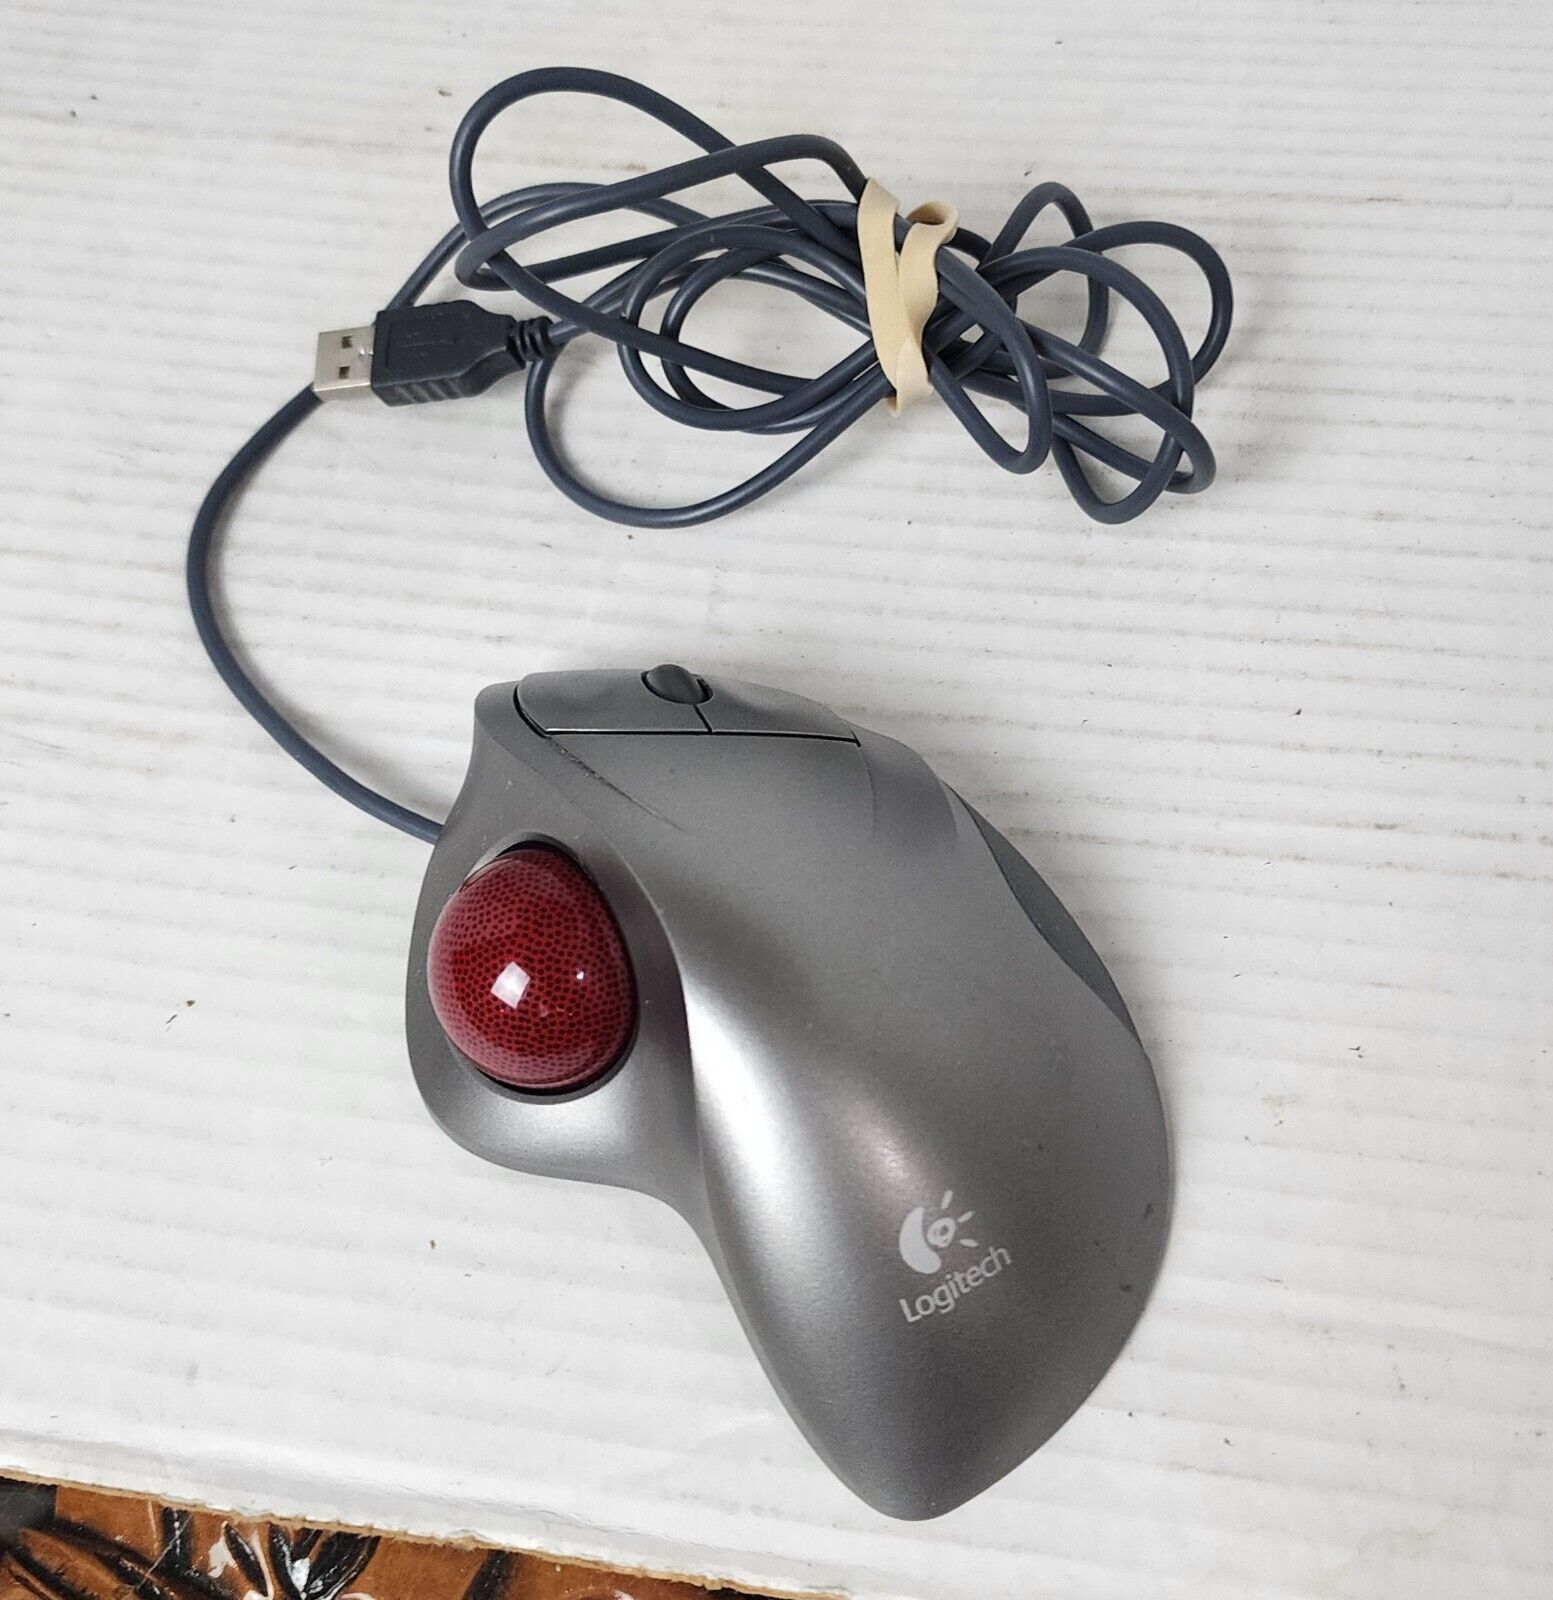 Logitech TrackMan Red Wheel Ball Wired USB Optical Mouse T-BB18 Silver EUC